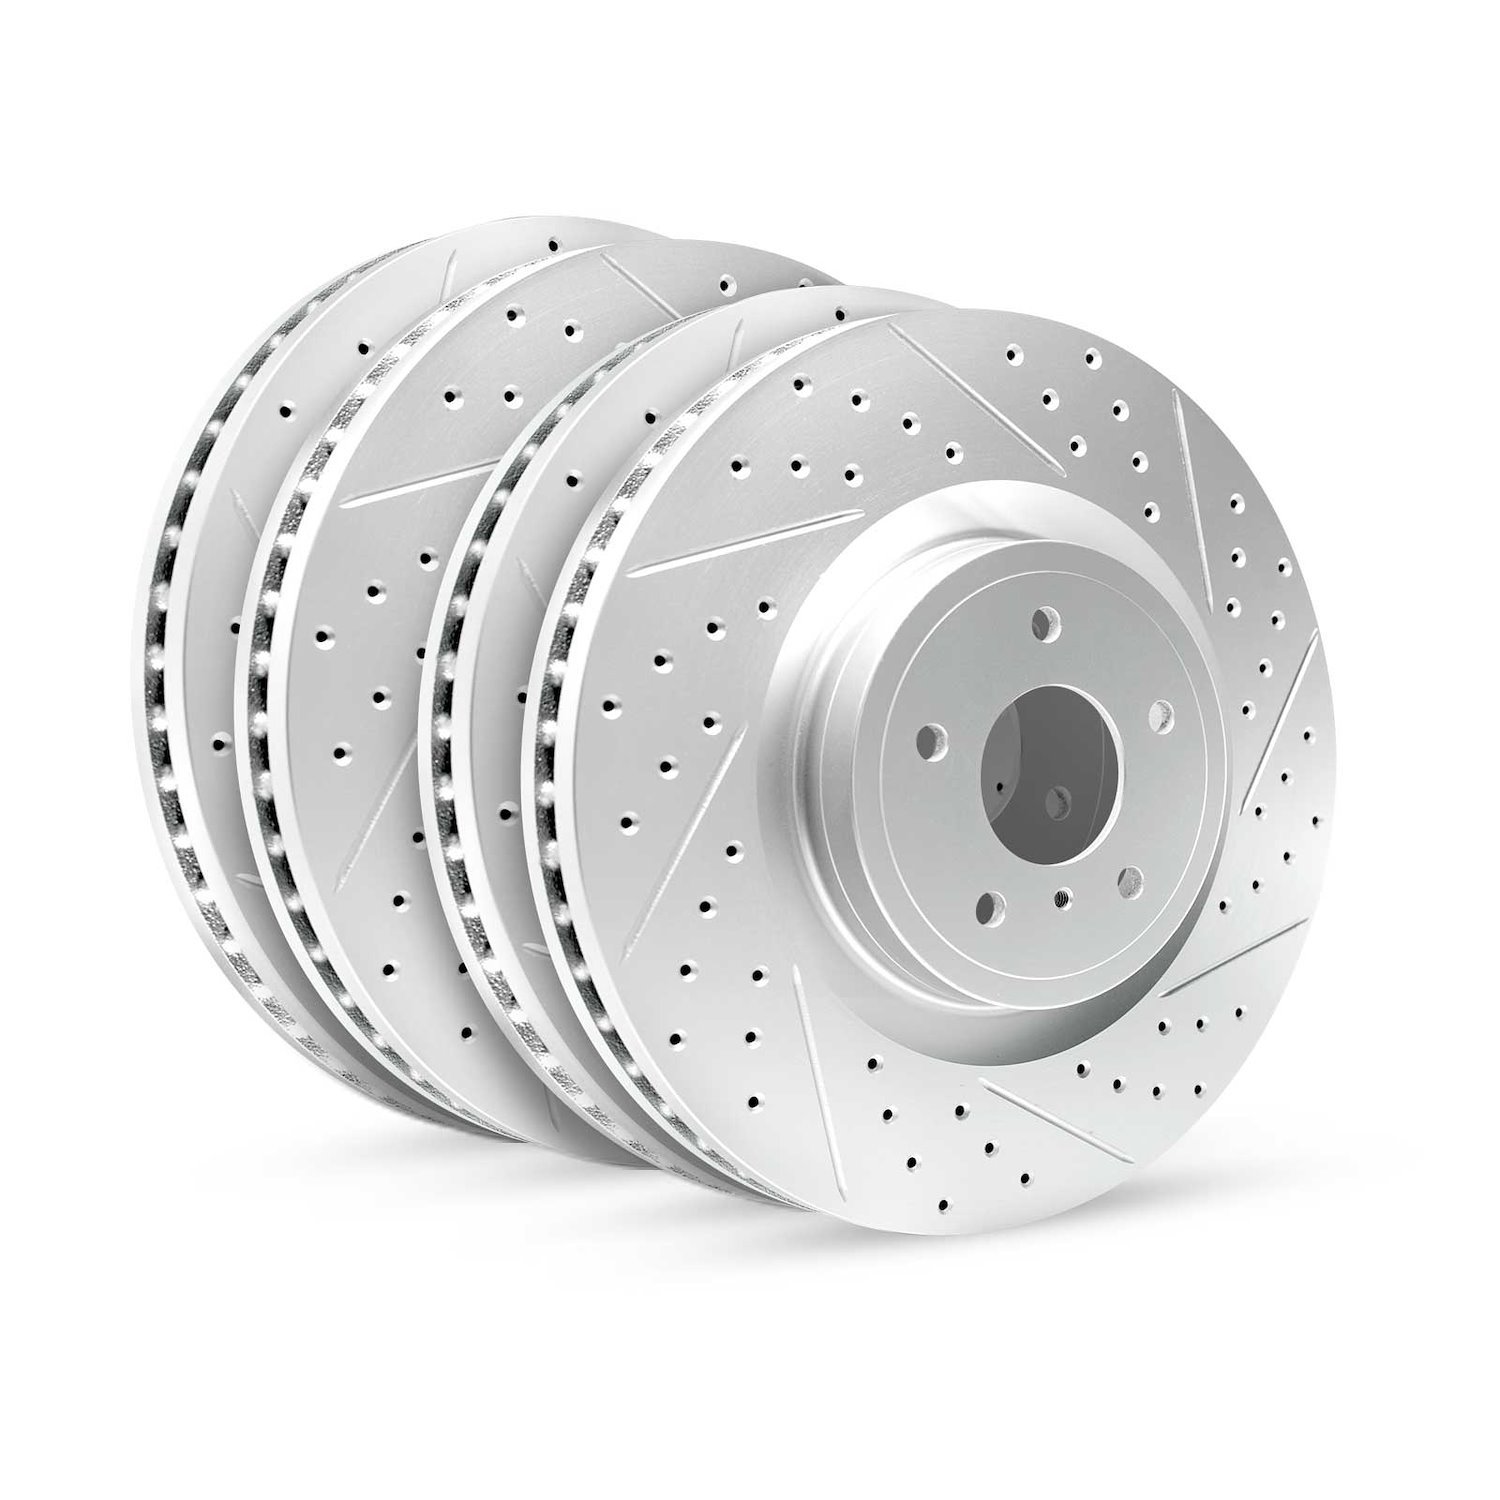 GEO-Carbon Drilled/Slotted Rotors, 2017-2017 Land Rover,